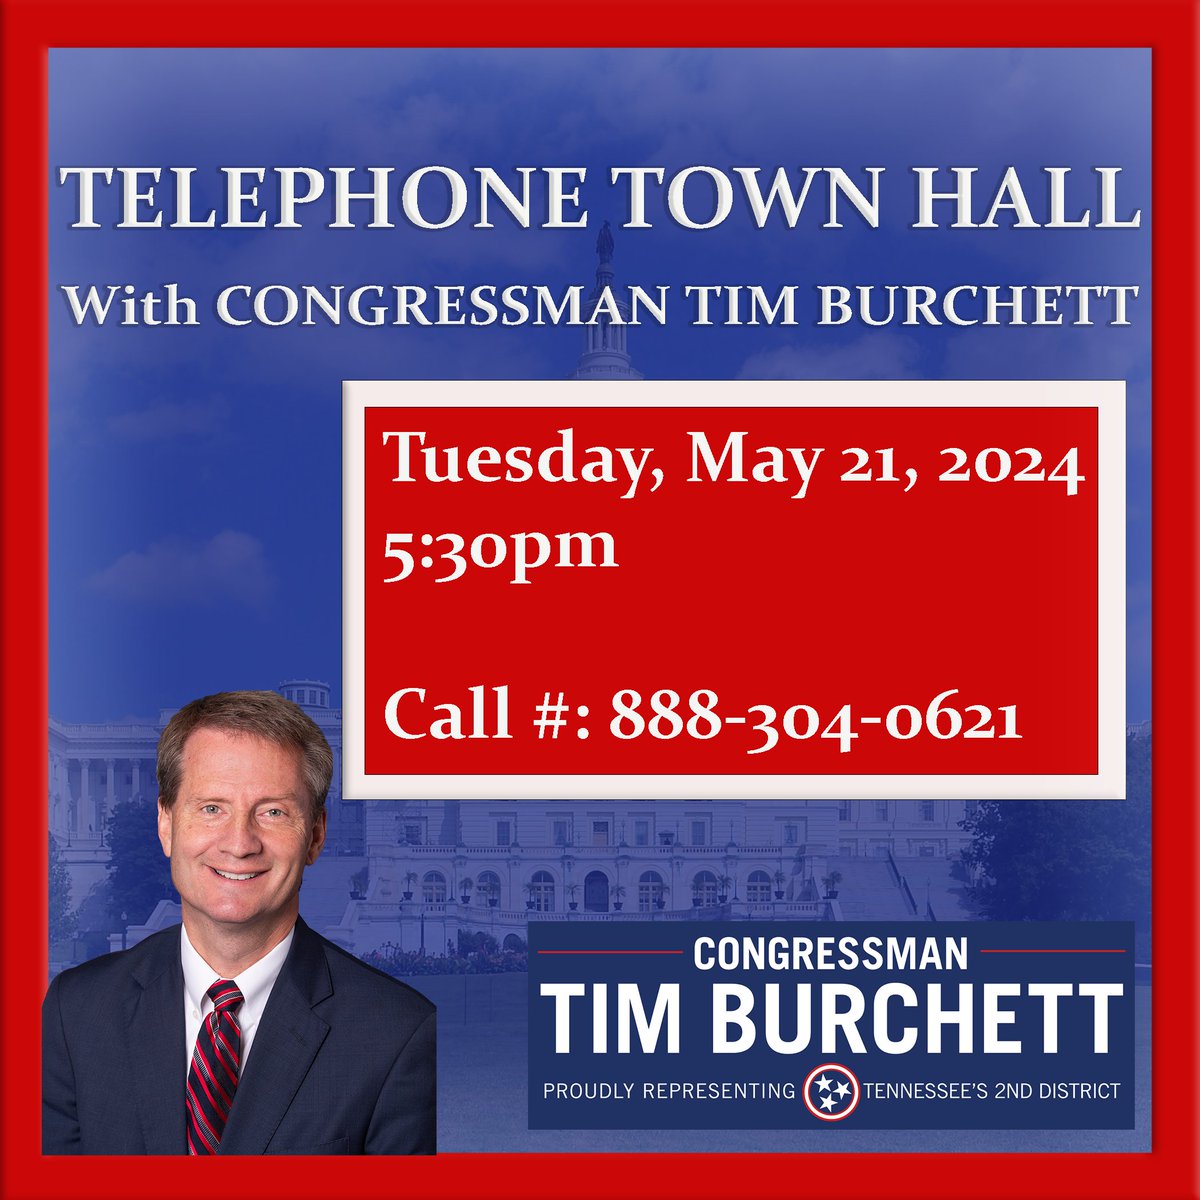 I'll be hosting a telephone town hall to talk with East Tennesseans tomorrow at 5:30pm EST. You can call in and ask questions at the number listed below. I'm looking forward to answering your questions!